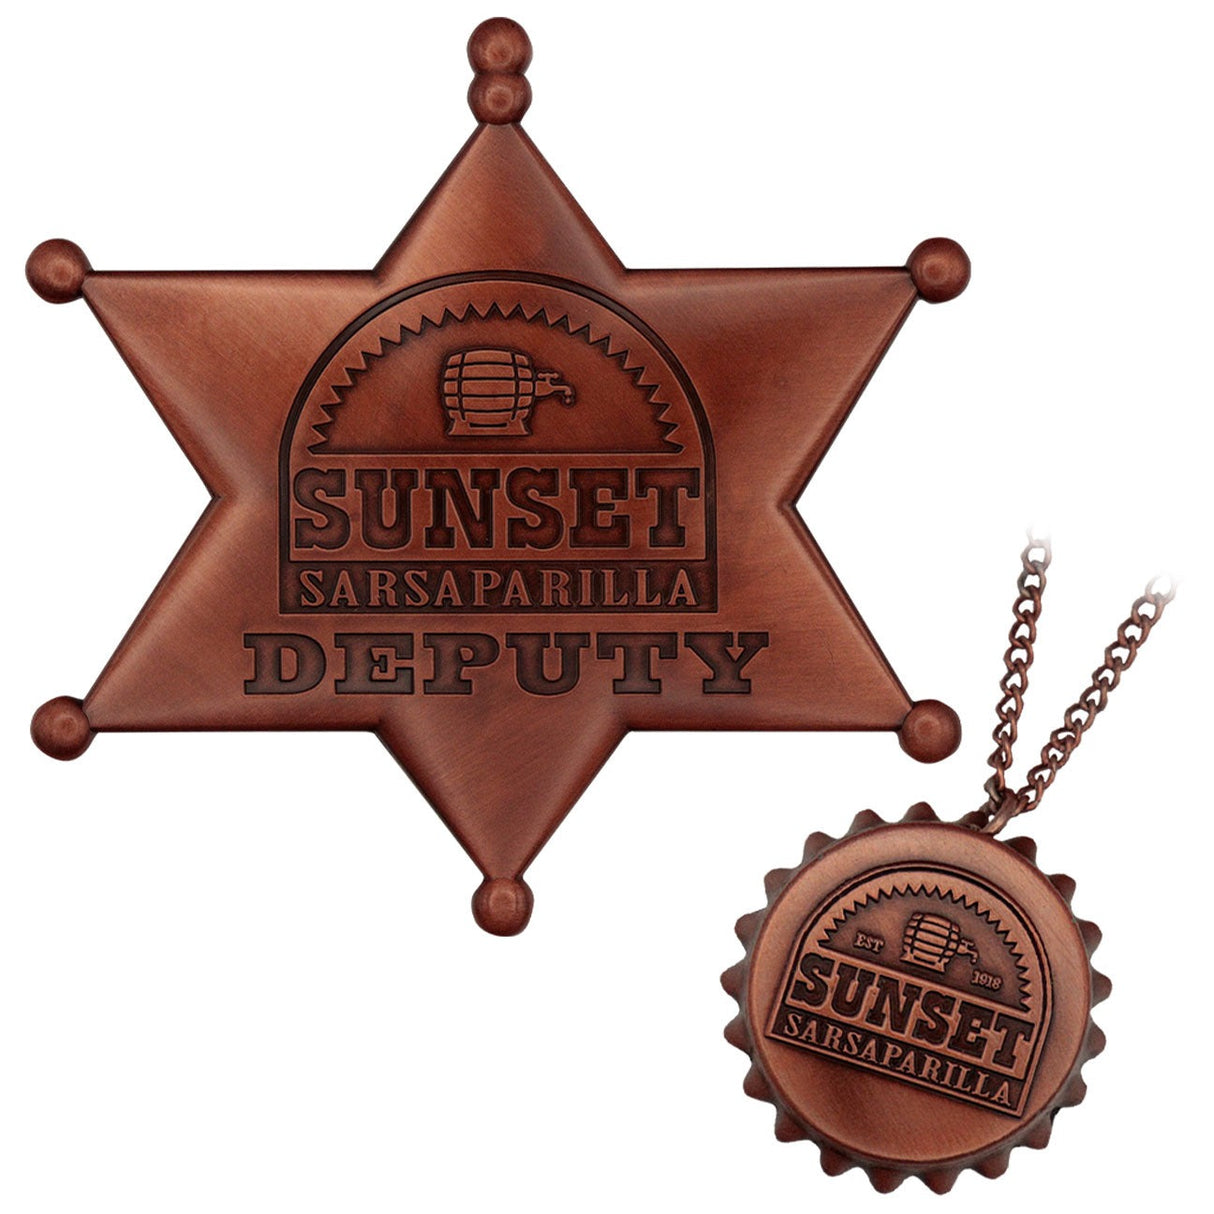 Fallout | Sunset Sarsaparilla | The Legend of The Star Set | Limited Edition